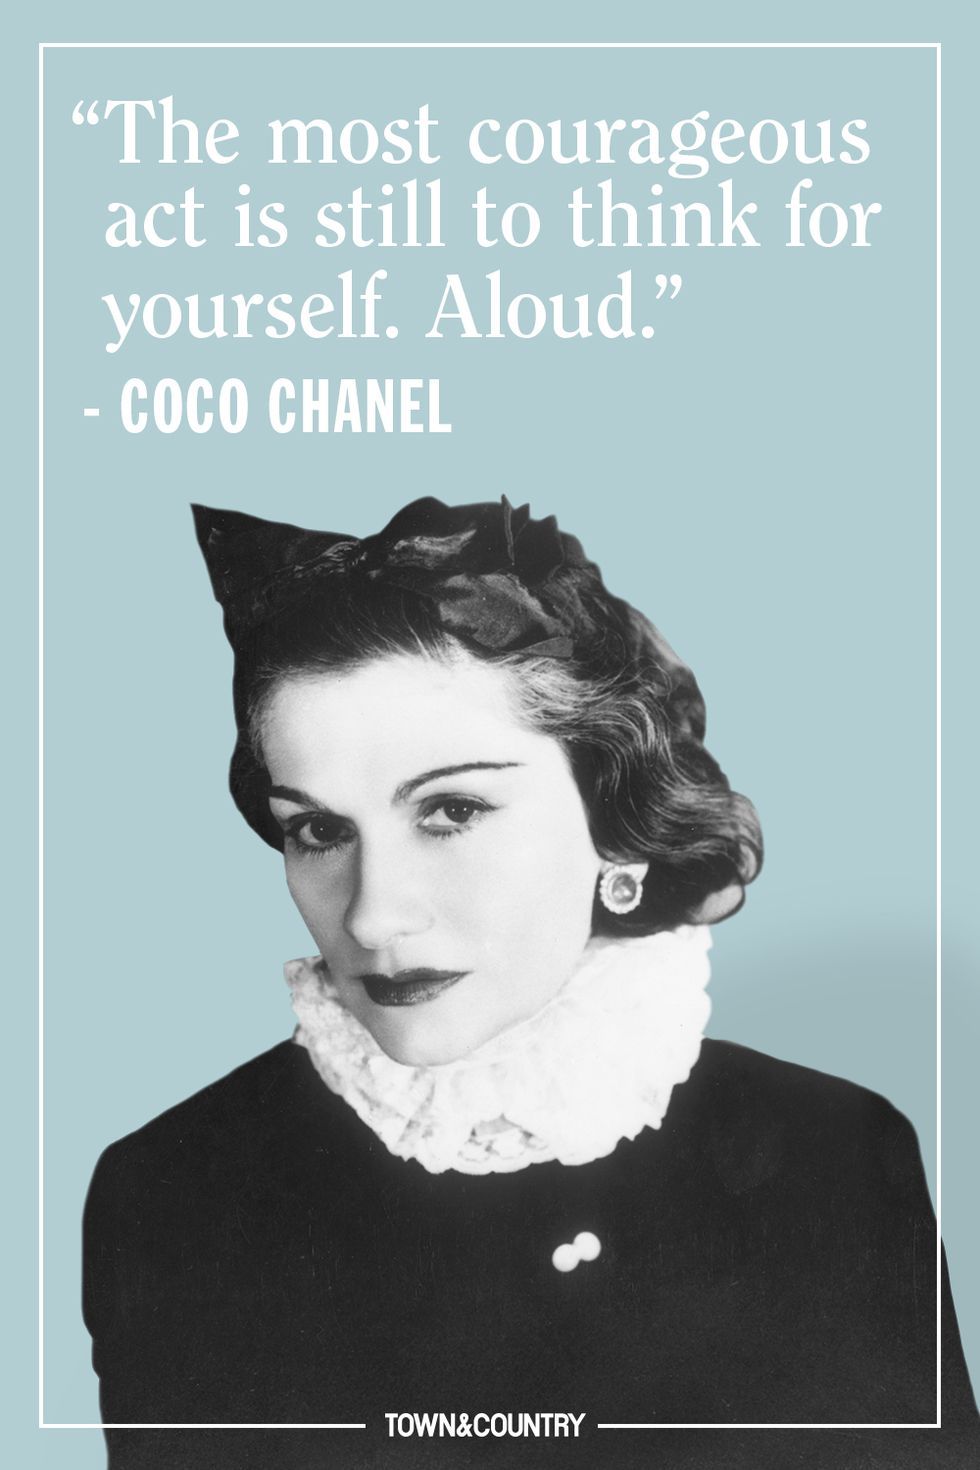 Words of wisdom from Coco Chanel. 💕